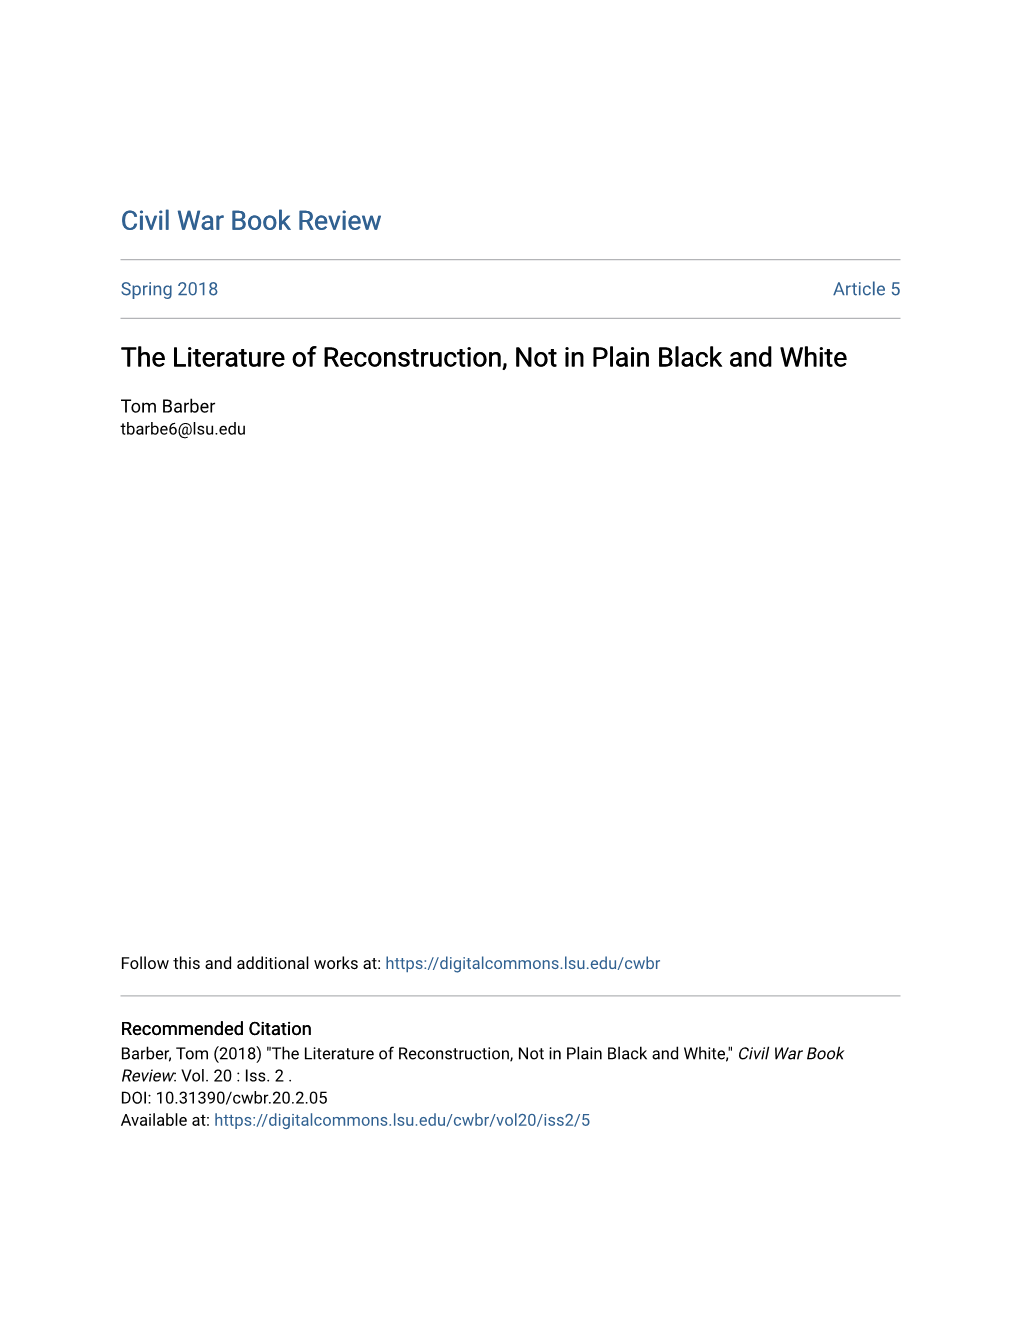 The Literature of Reconstruction, Not in Plain Black and White